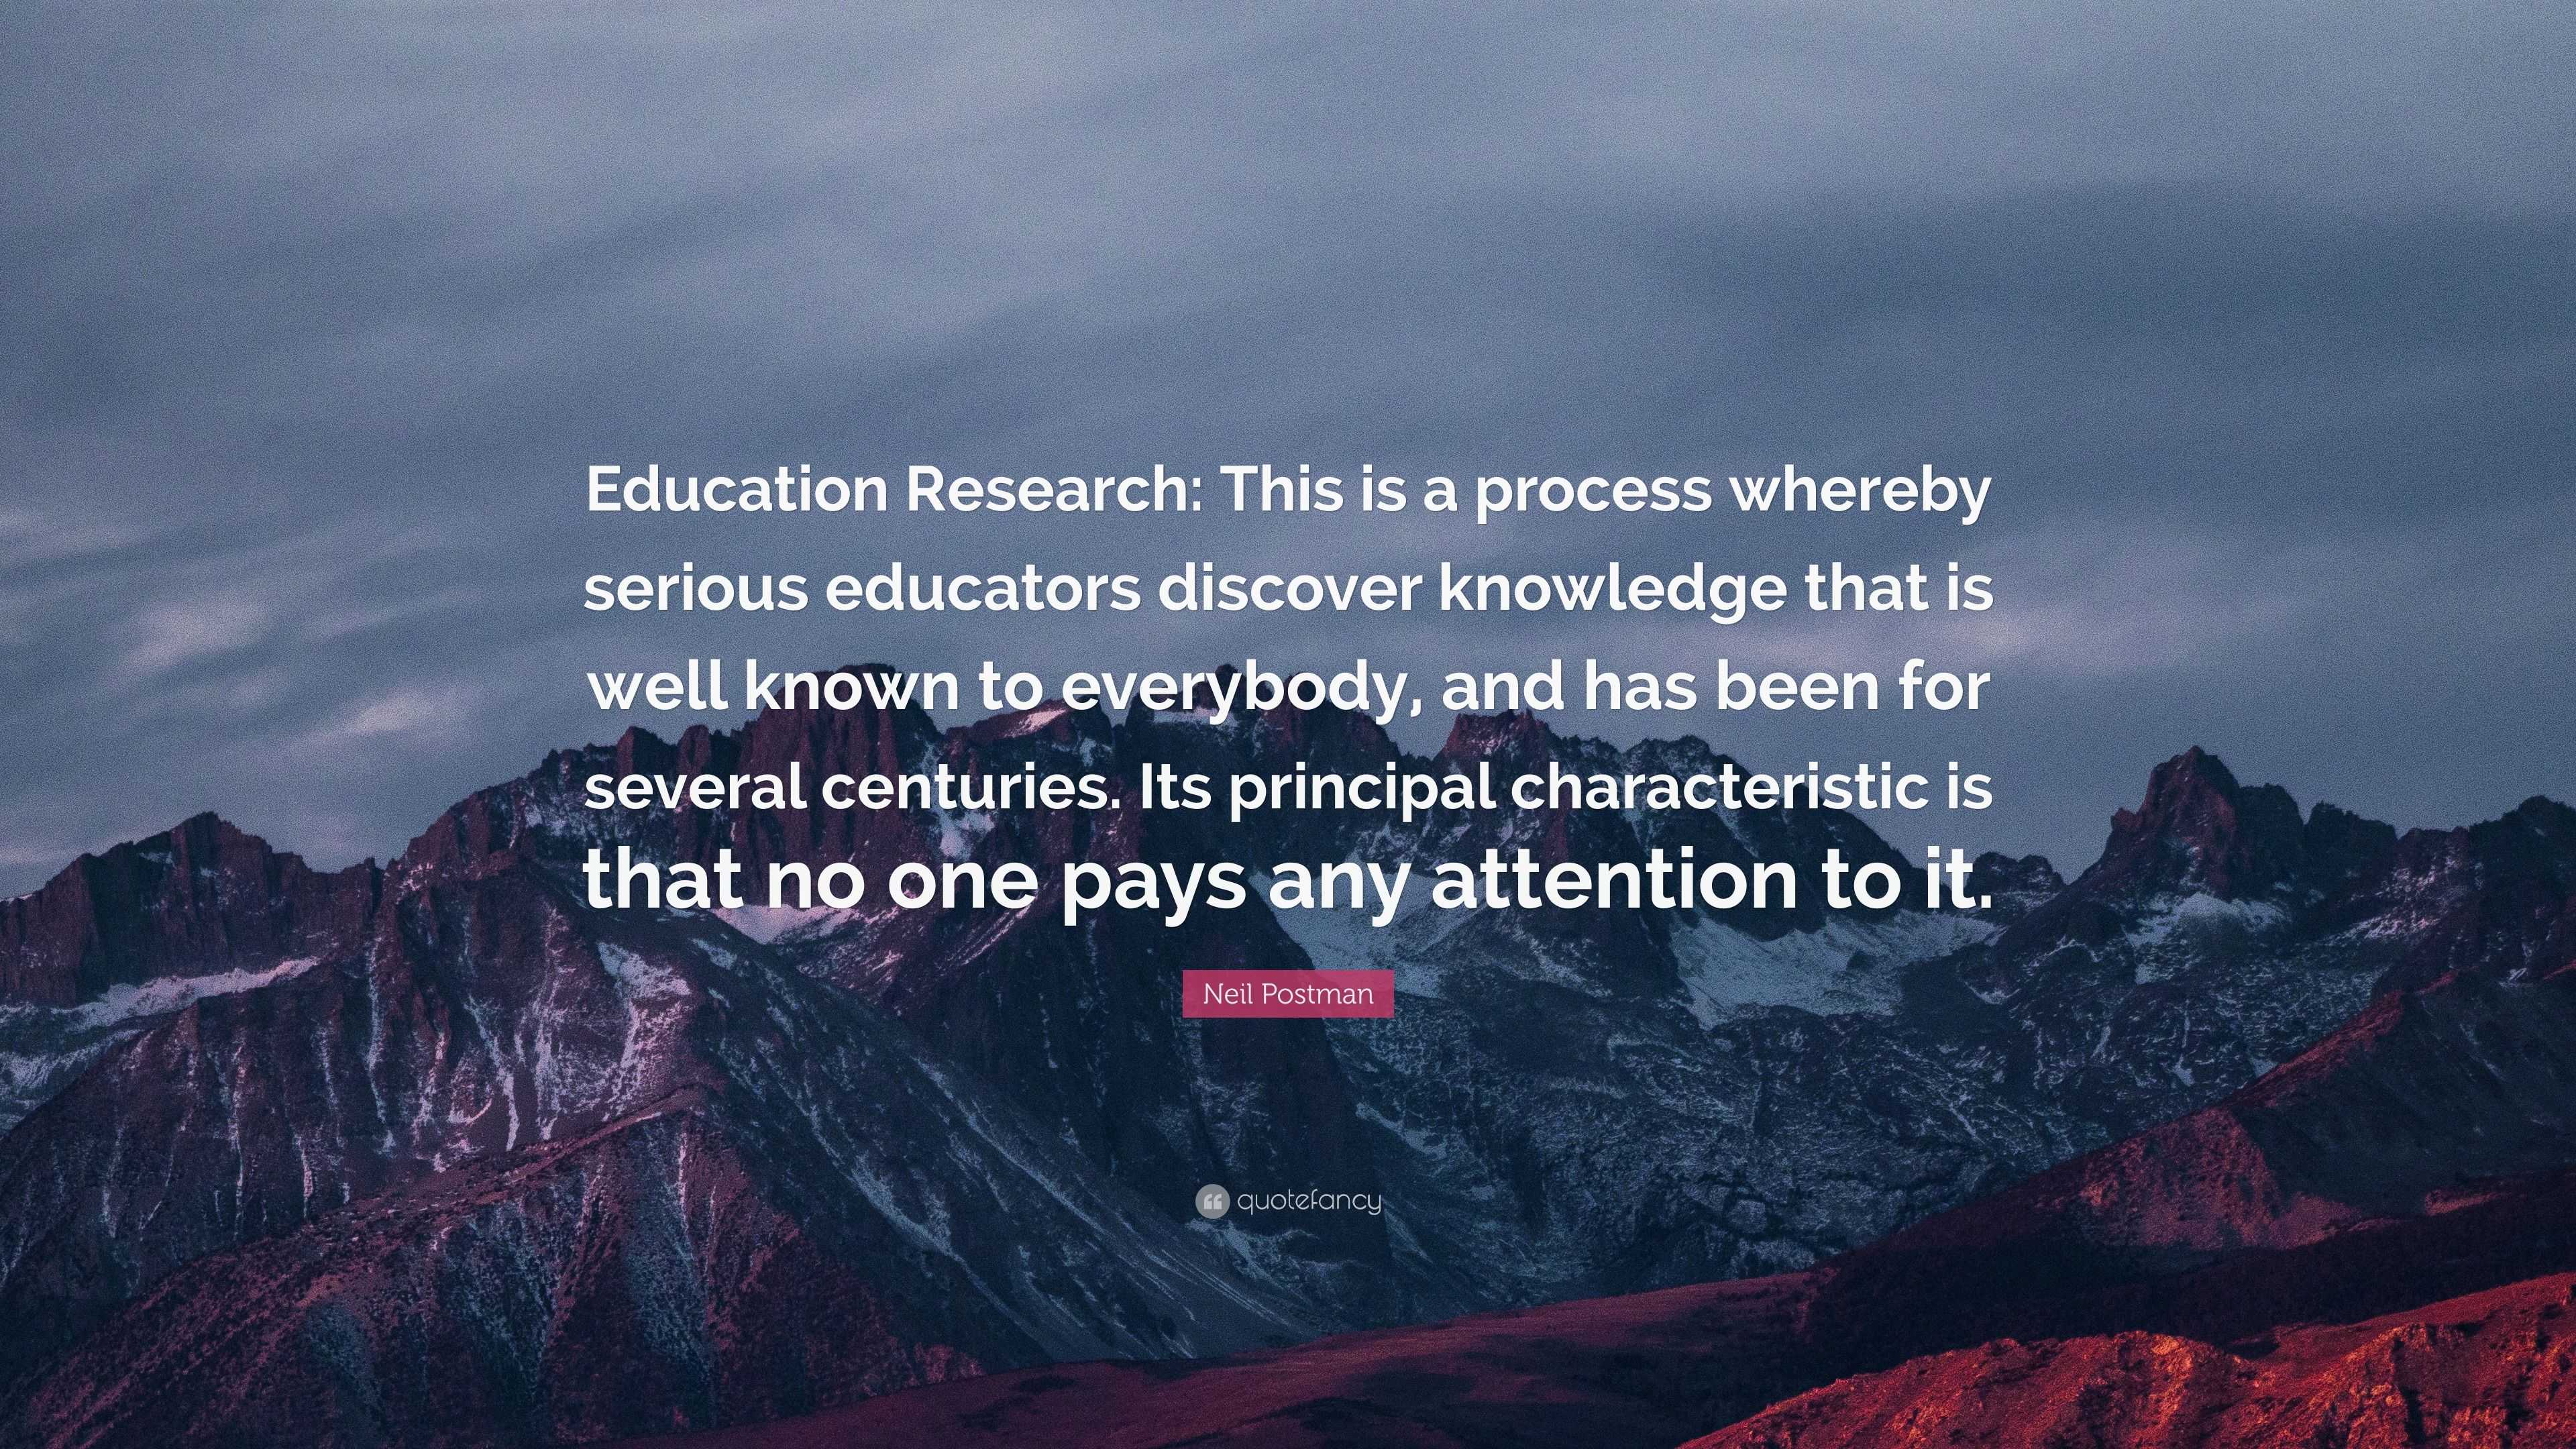 Neil Postman Quote: “Education Research: This is a process whereby